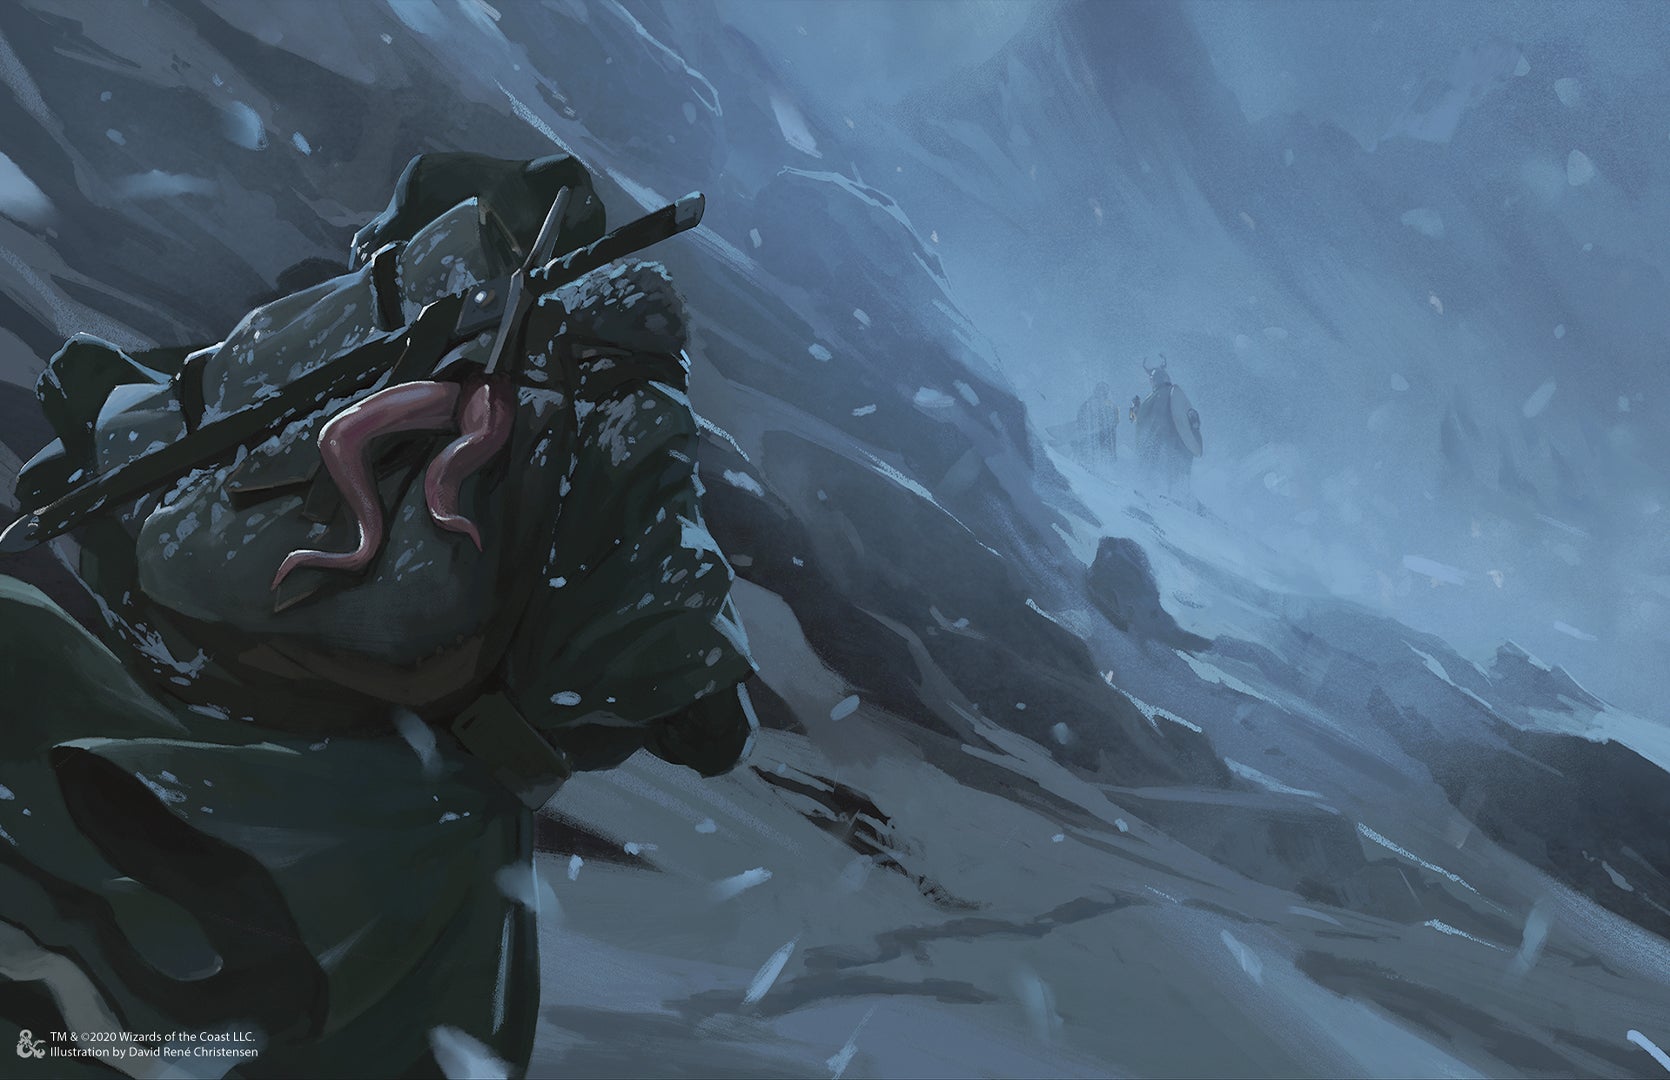 Dungeons & Dragons Reveals Icewind Dale: Rime of the Frostmaiden at D&D Live 2020